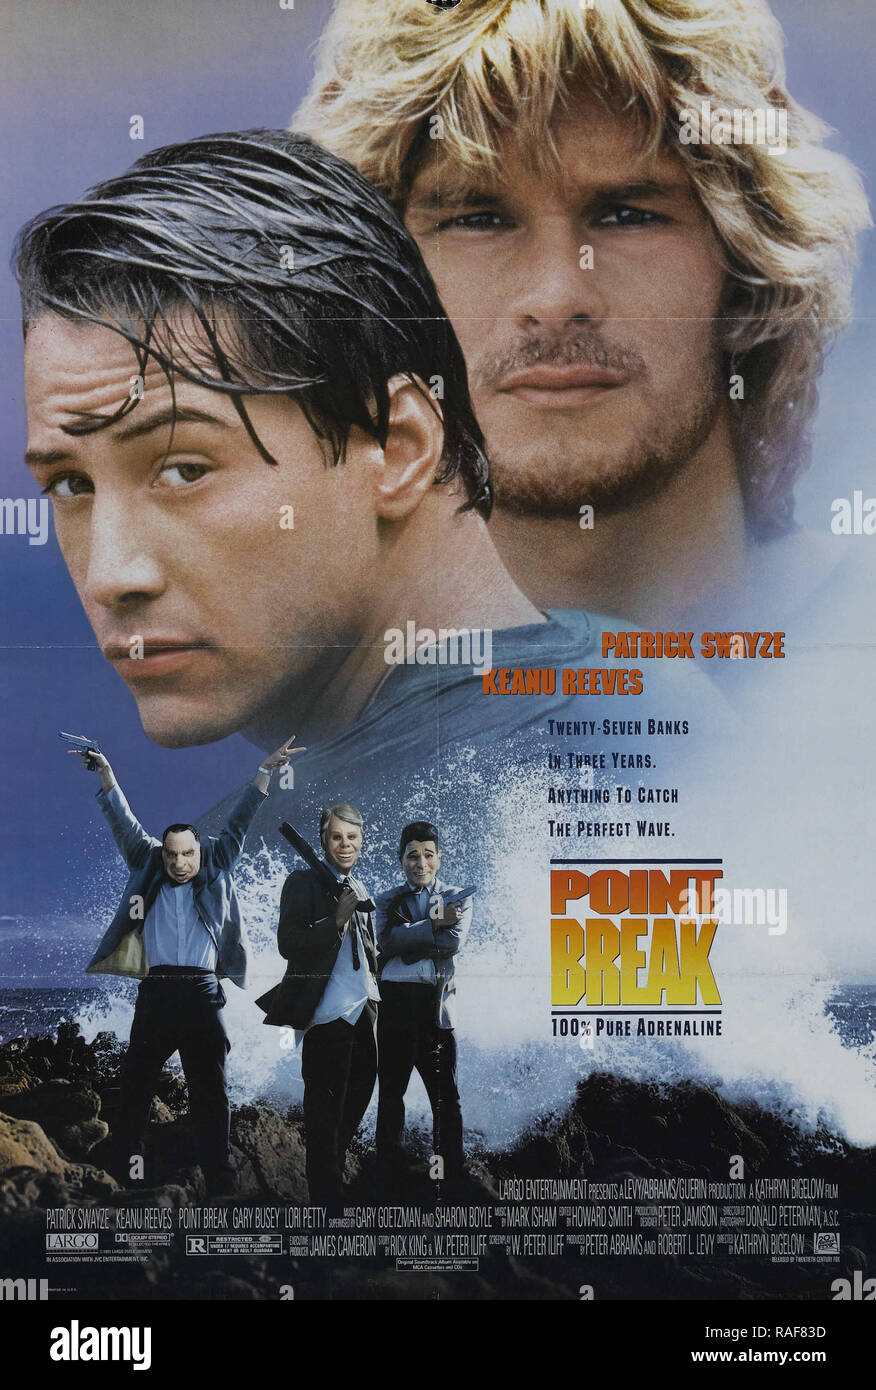 Point Break (20th Century Fox, 1991), Poster  Keanu Reeves, Patrick Swayze  File Reference # 33636 837THA Stock Photo